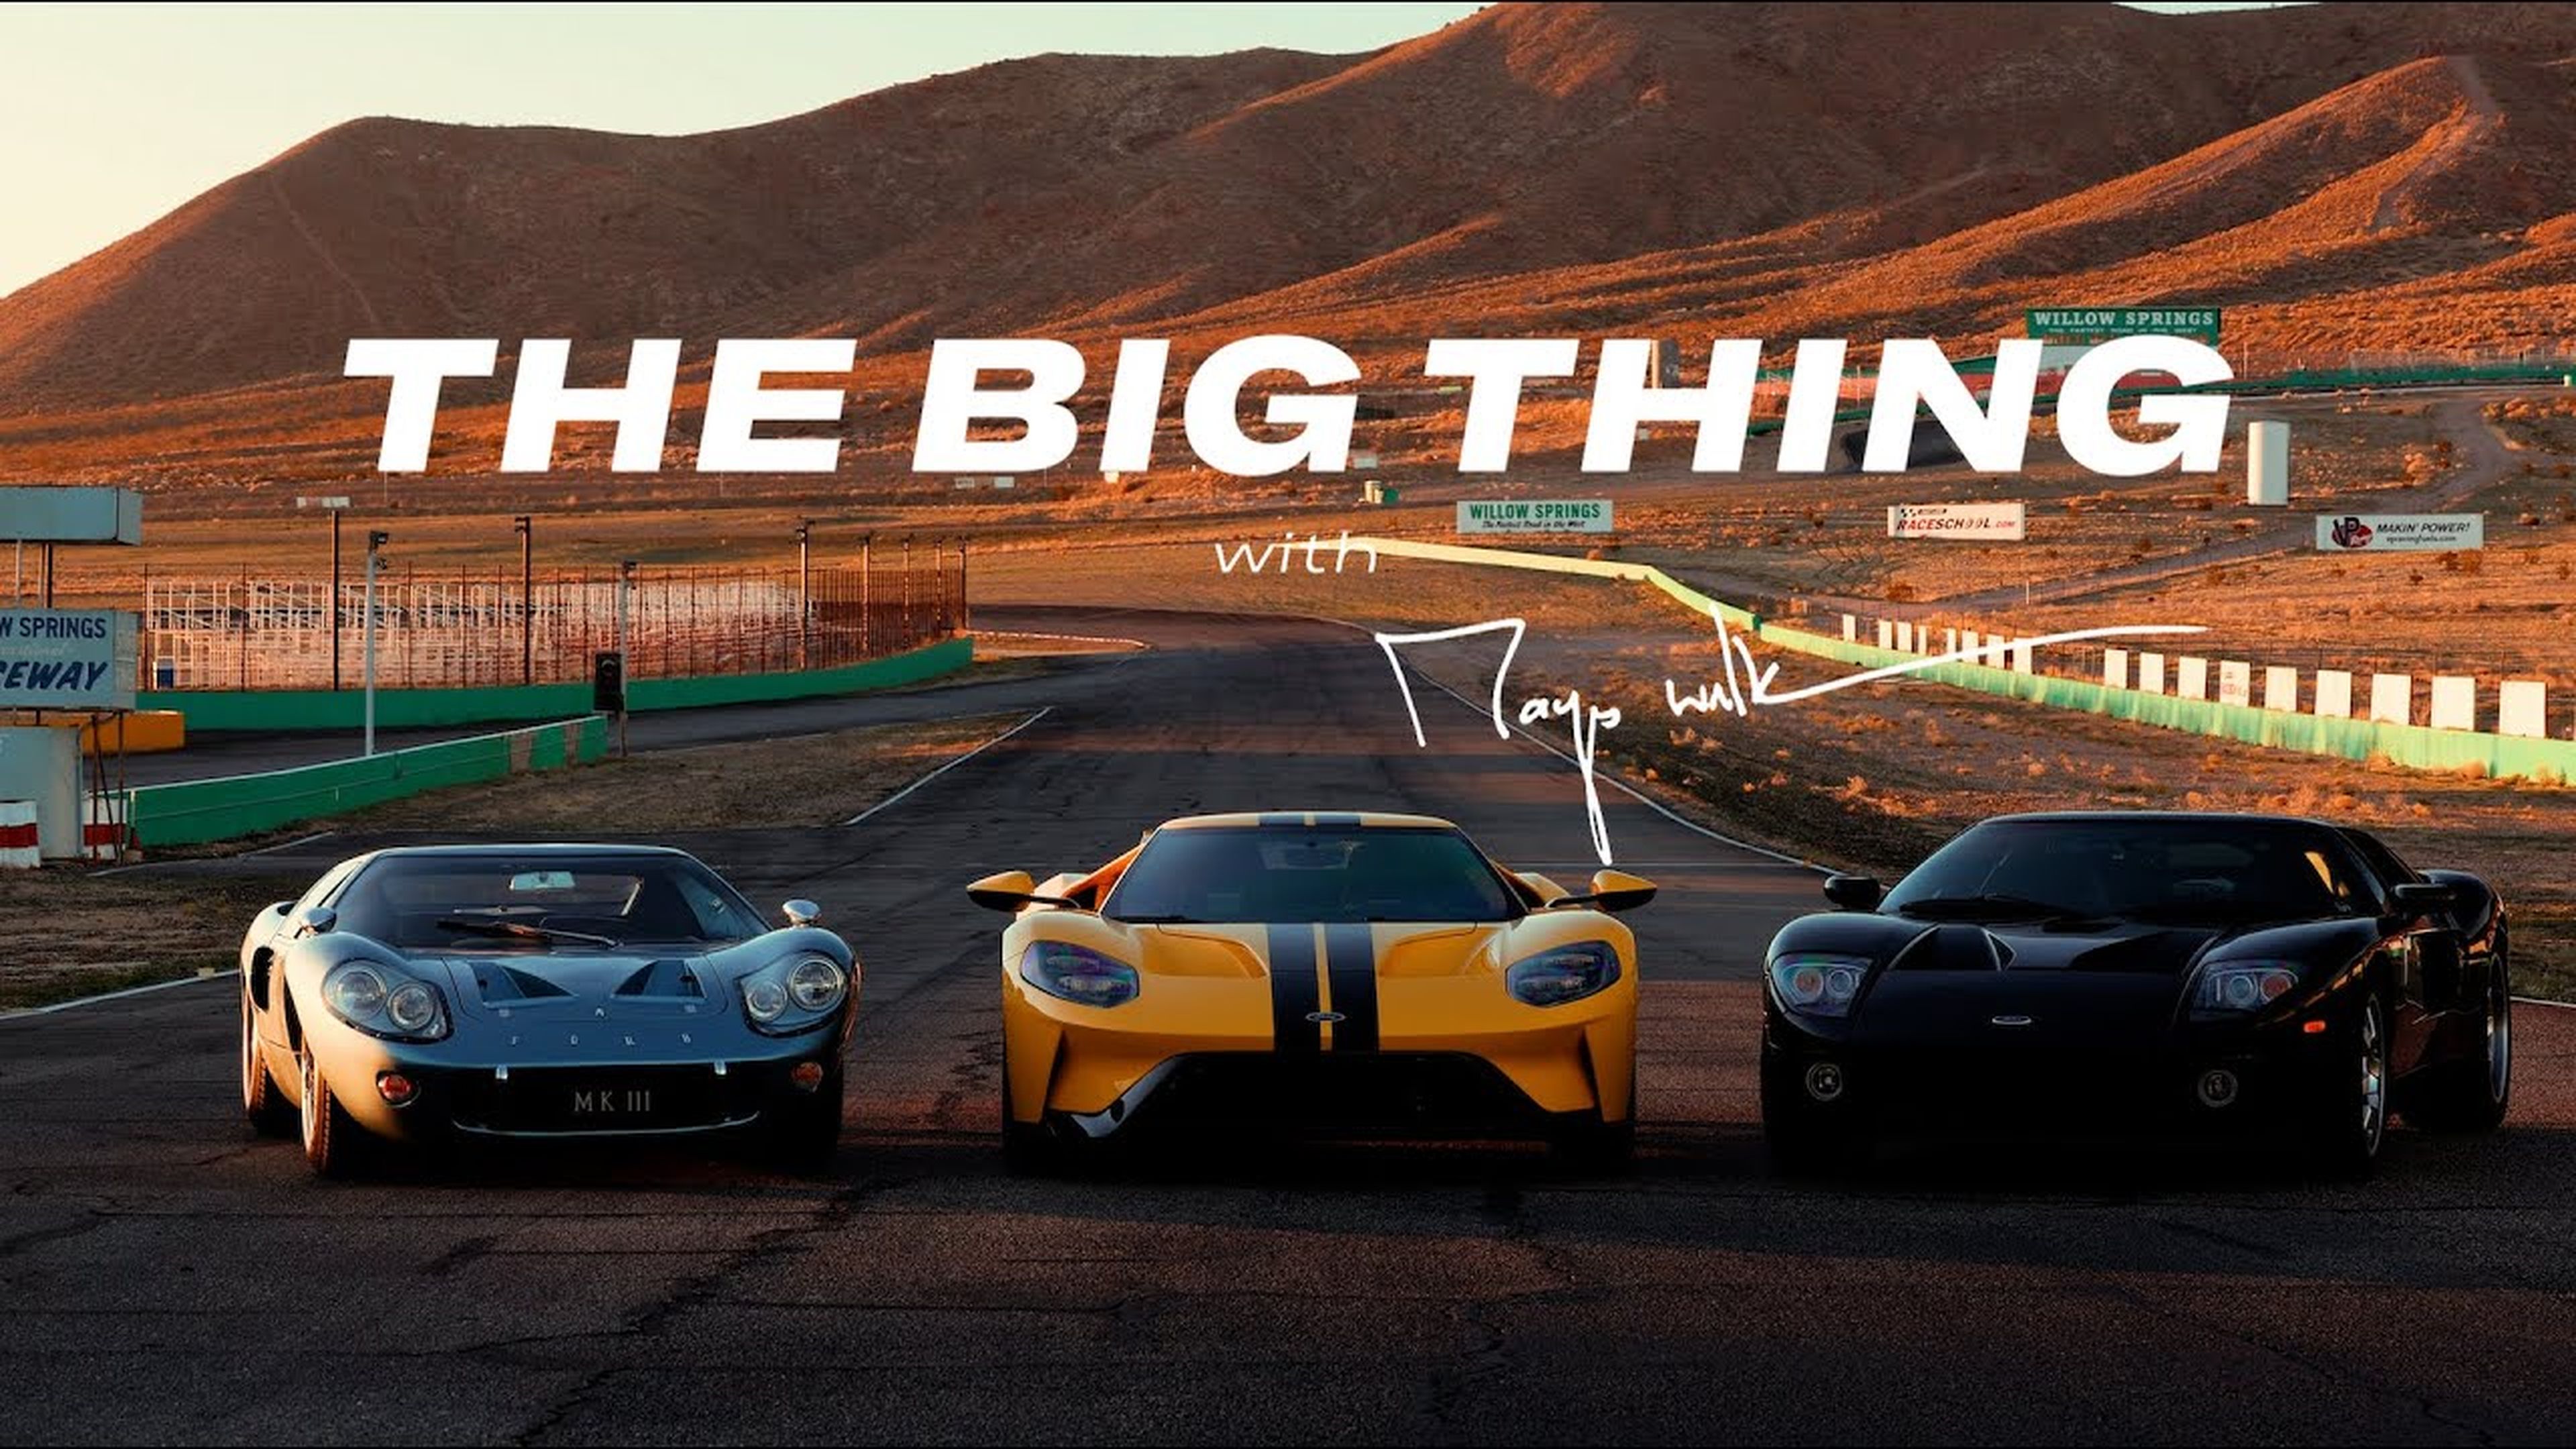 America's Supercar: The Ford GT | The Big Thing with Magnus Walker